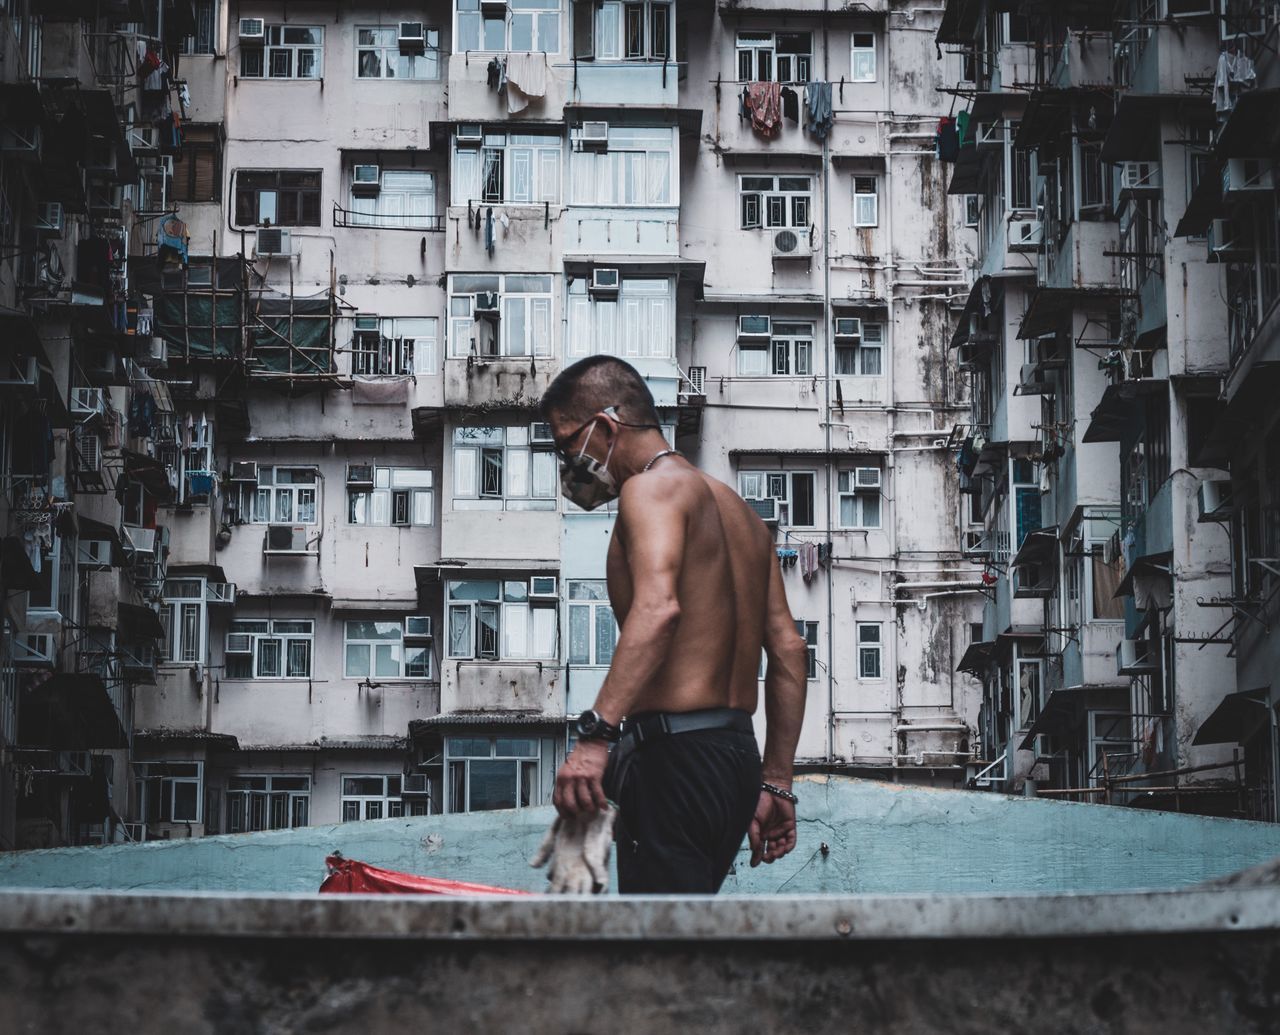 shirtless, one person, real people, men, architecture, males, mid adult, adult, young adult, lifestyles, young men, three quarter length, built structure, sitting, mid adult men, building exterior, standing, day, looking, contemplation